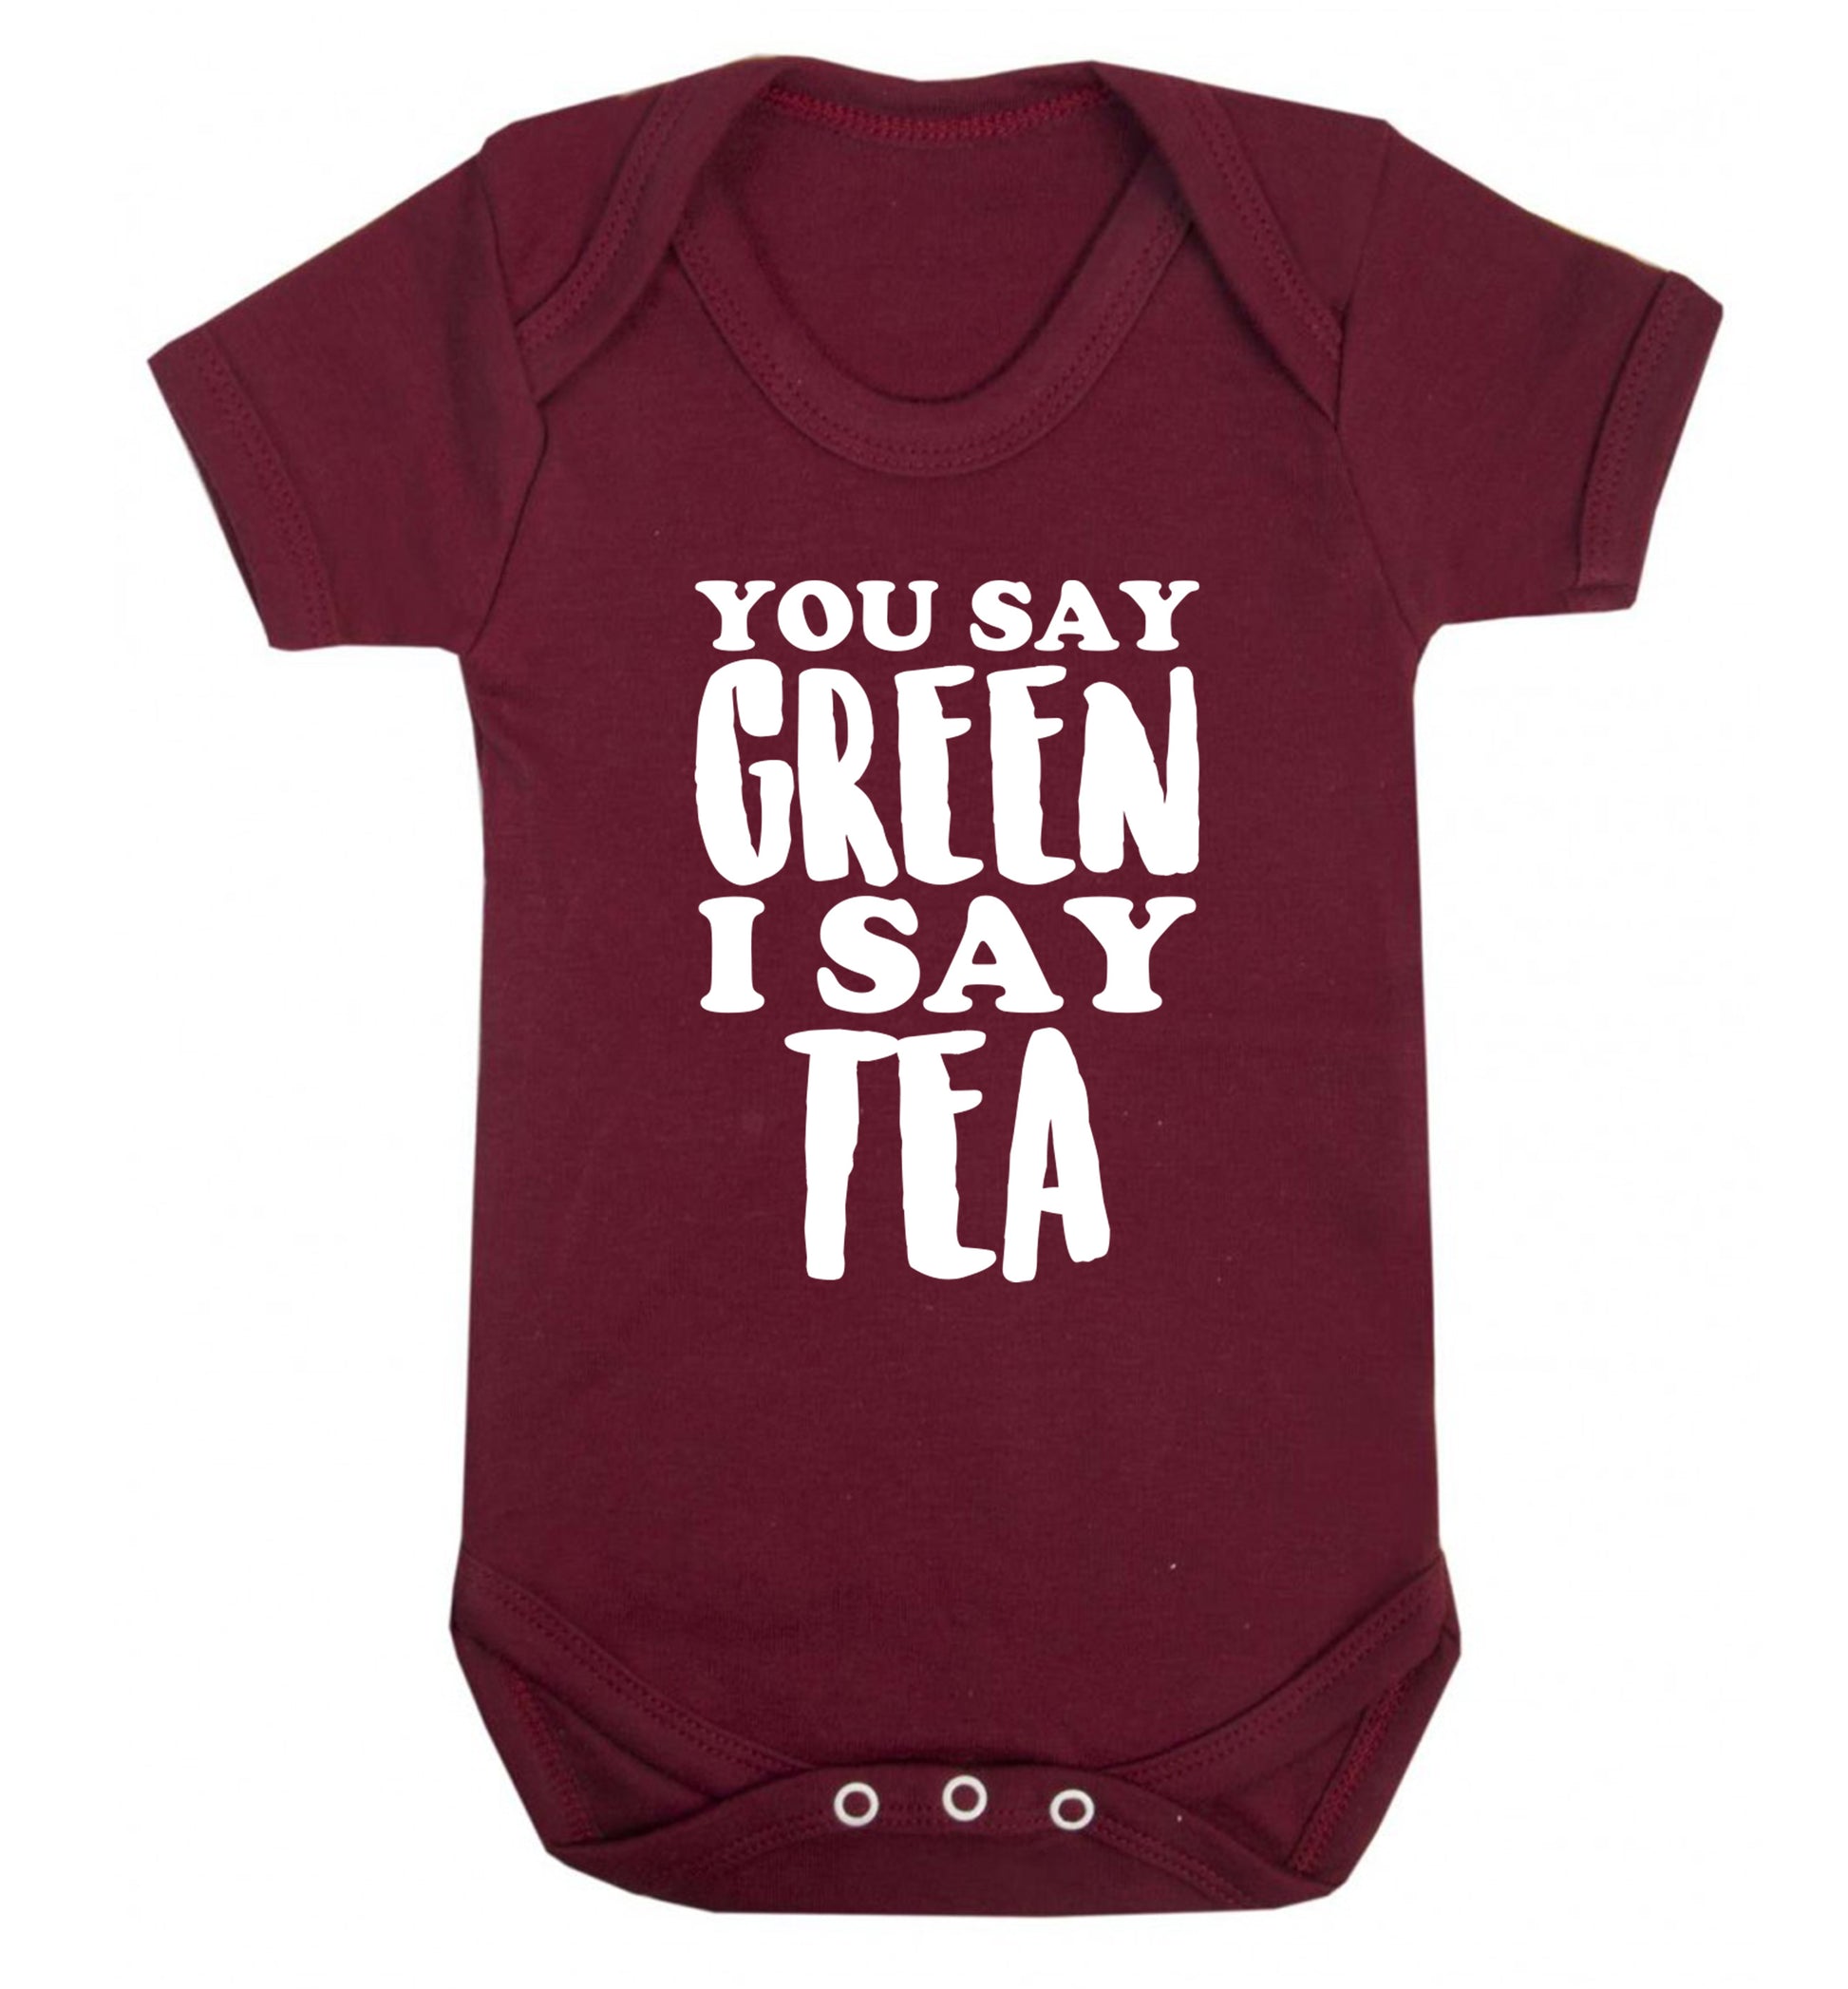 You say green I say tea! Baby Vest maroon 18-24 months